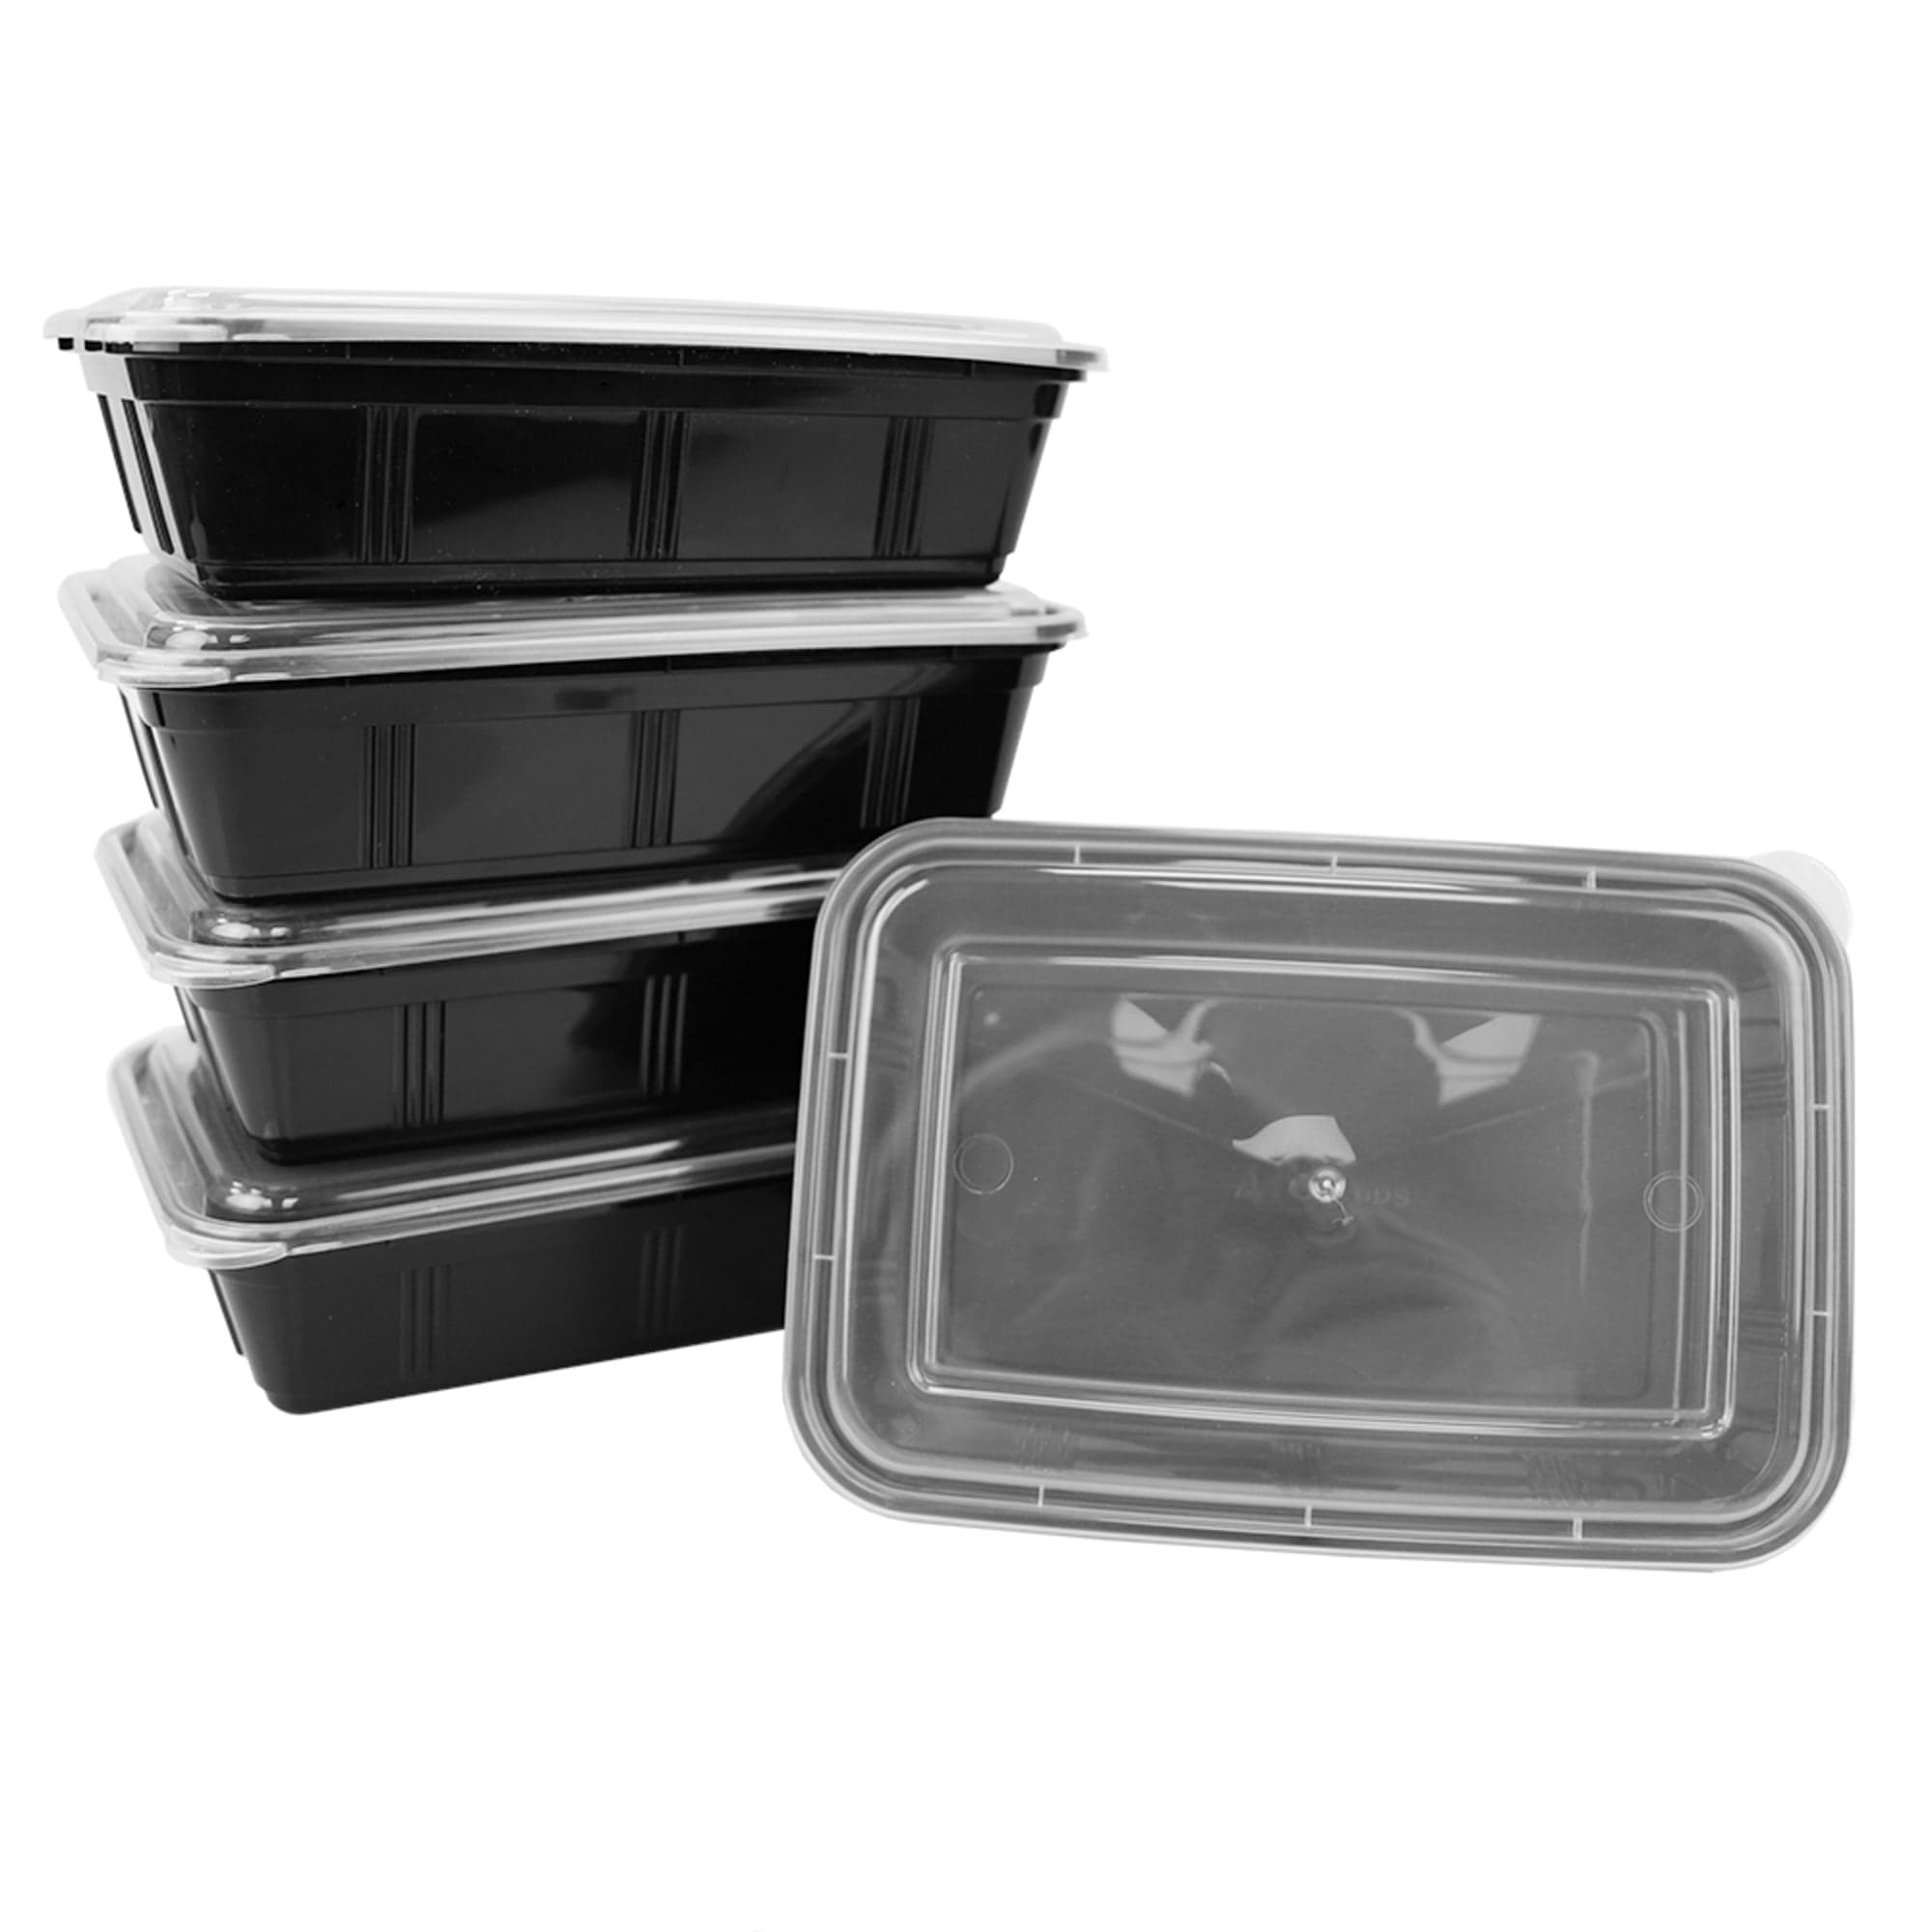 Meal Prep Containers [38OZ] Plastic Food Storage Containers with Lids,10-Pack Reusable to Go Containers, Disposable Food Prep Containers, BPA-Free